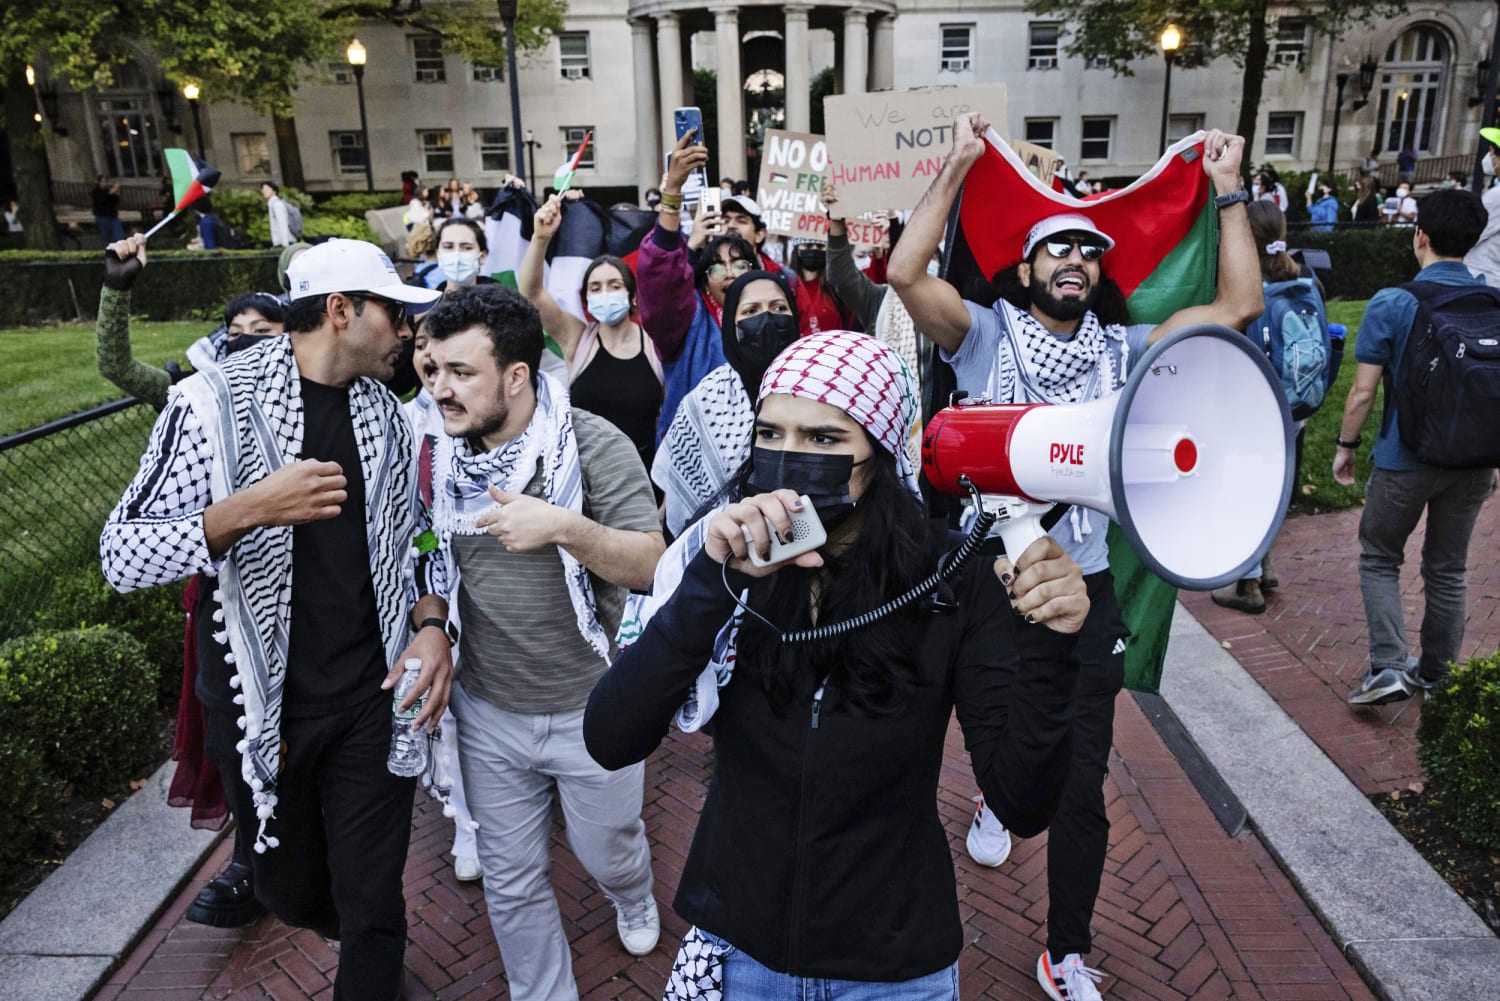 Pro-Palestinian protests spark nationwide tensions on US campuses (Credits: NBC News)